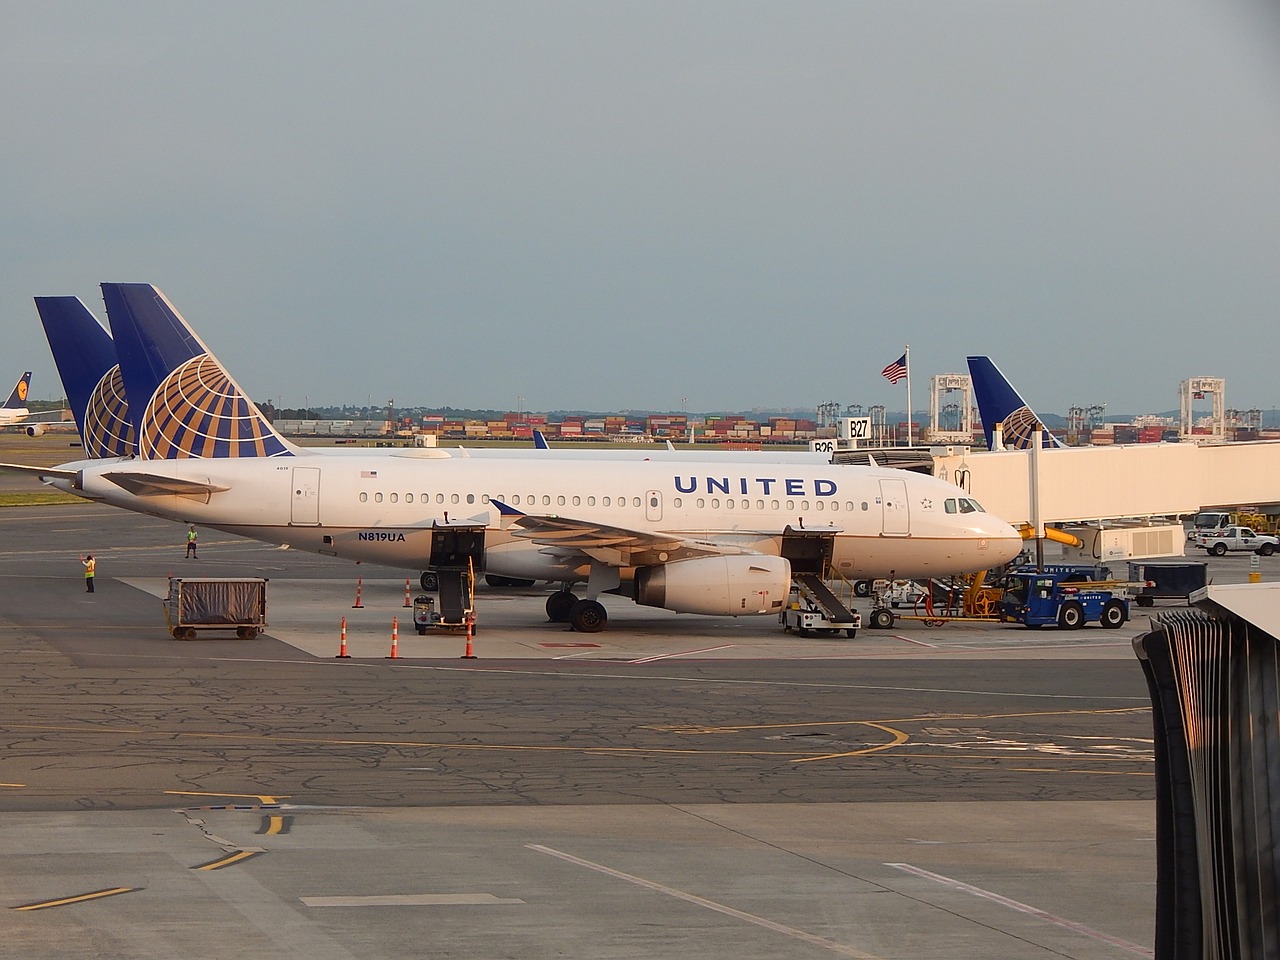 How Do I Upgrade My Seat on United Airlines? -Skynair